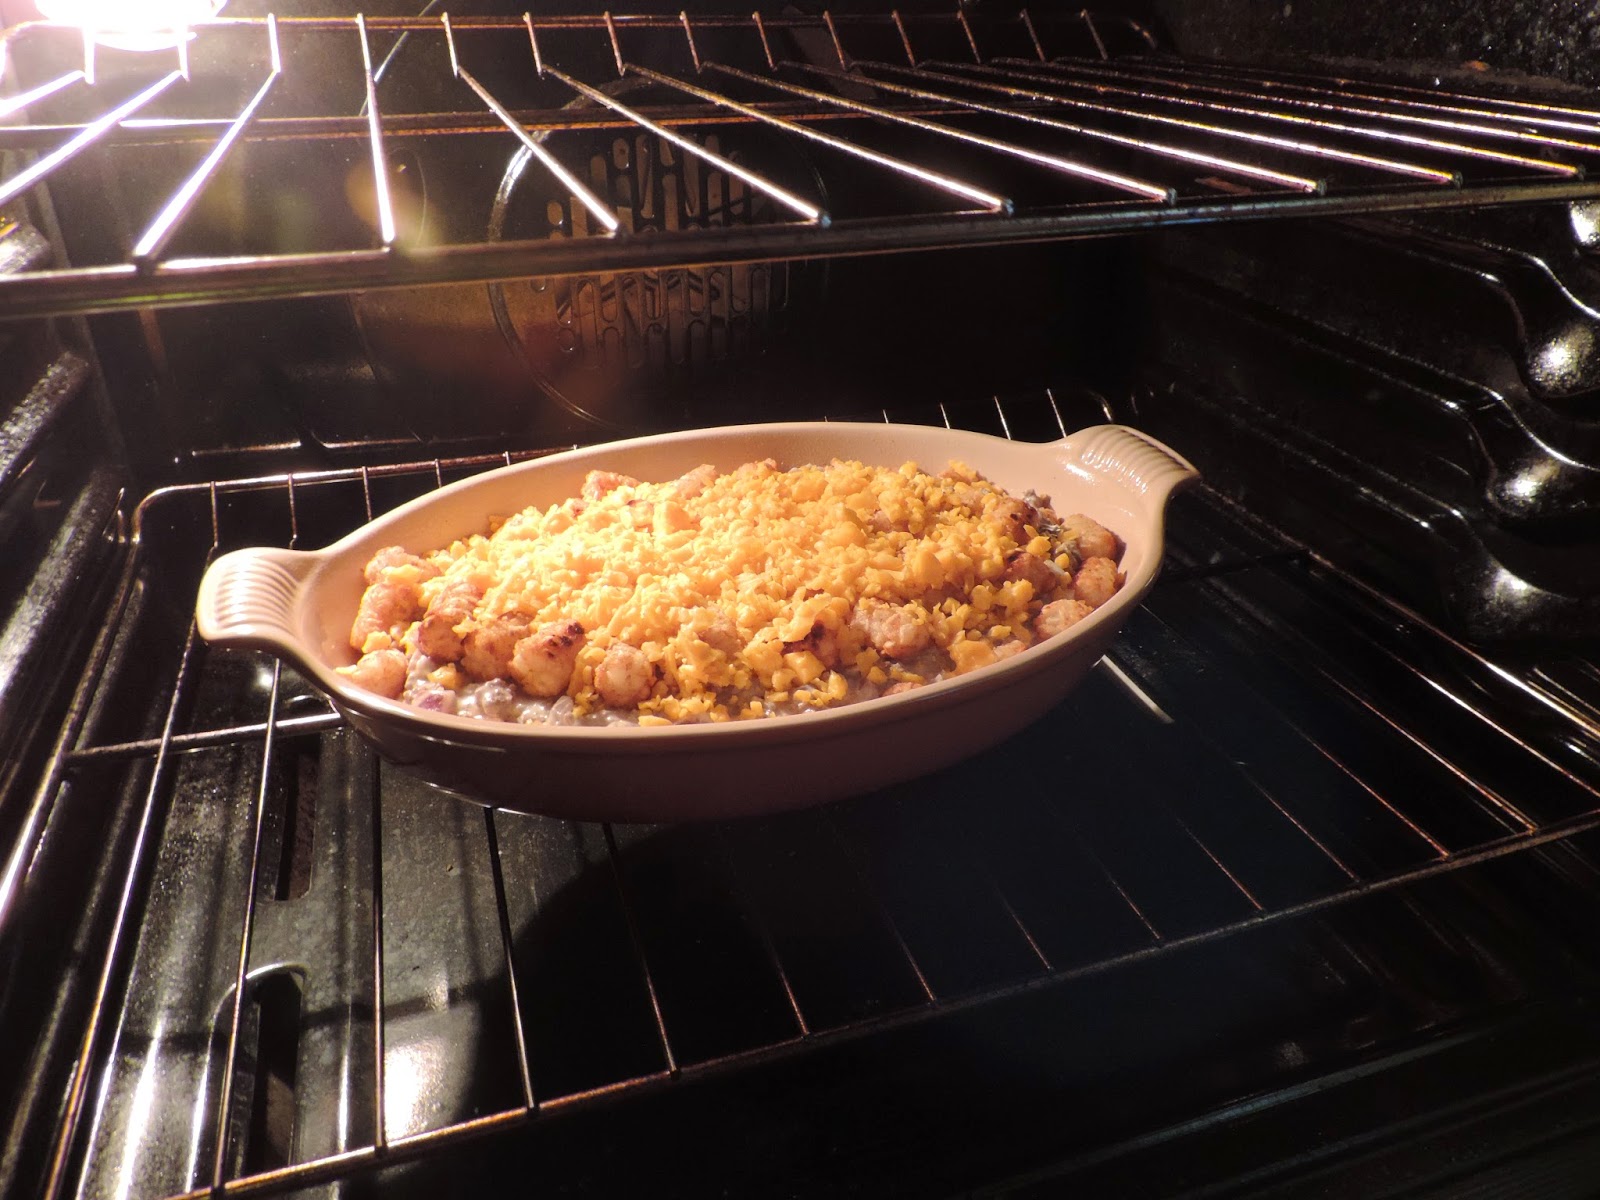 The cheese tater tot casserole in the oven.  